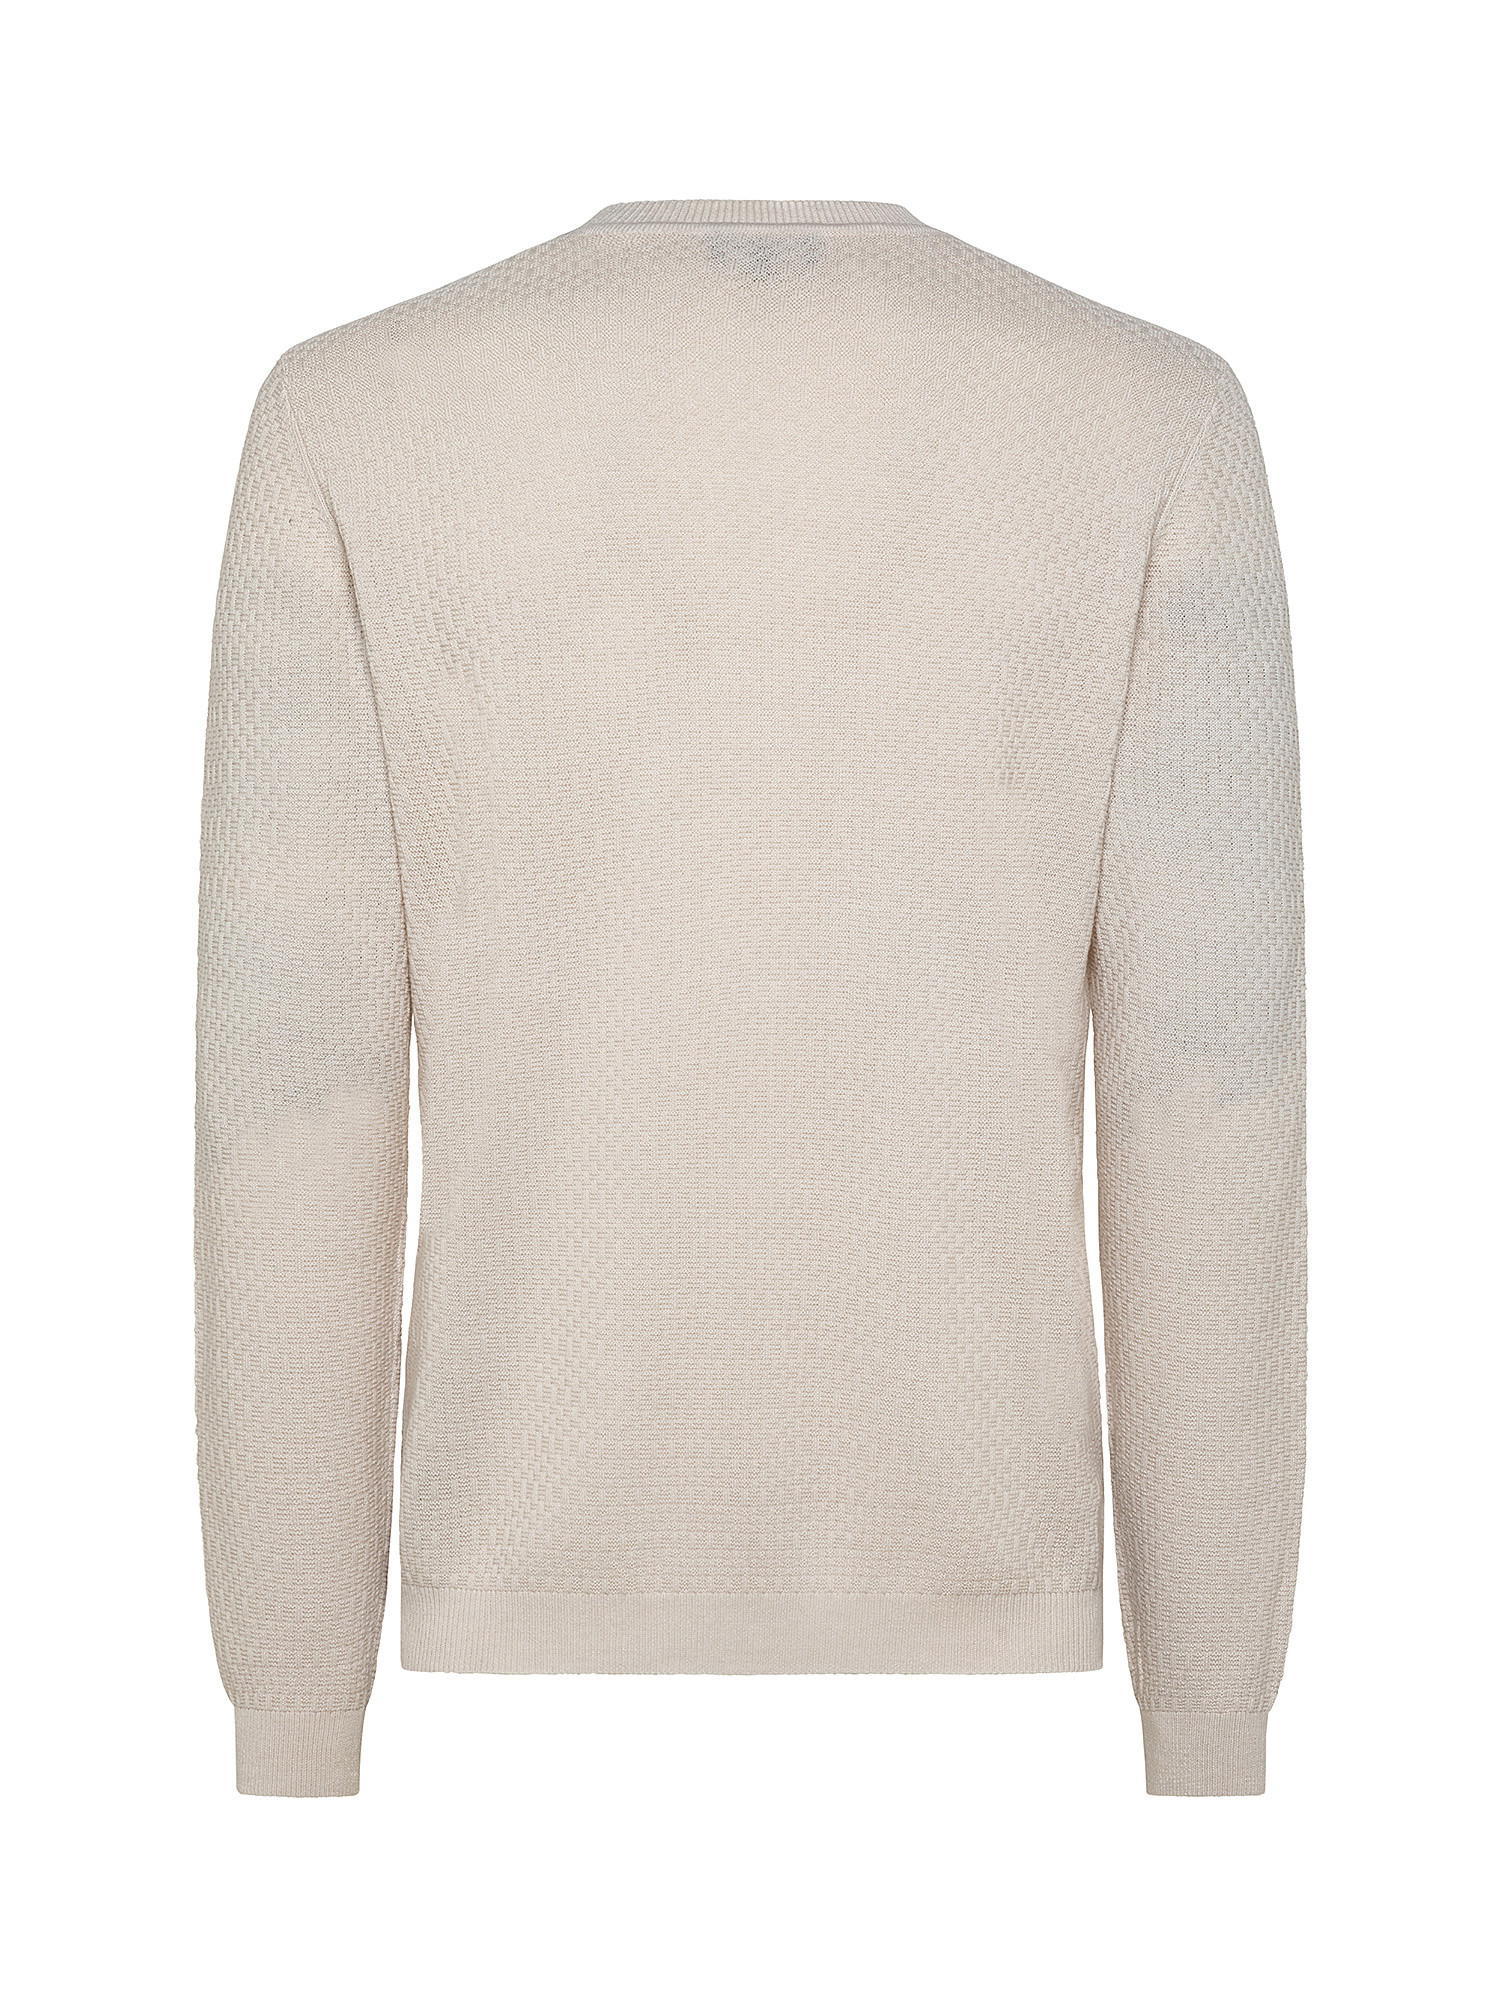 Crewneck sweater in wool blend, White Cream, large image number 1